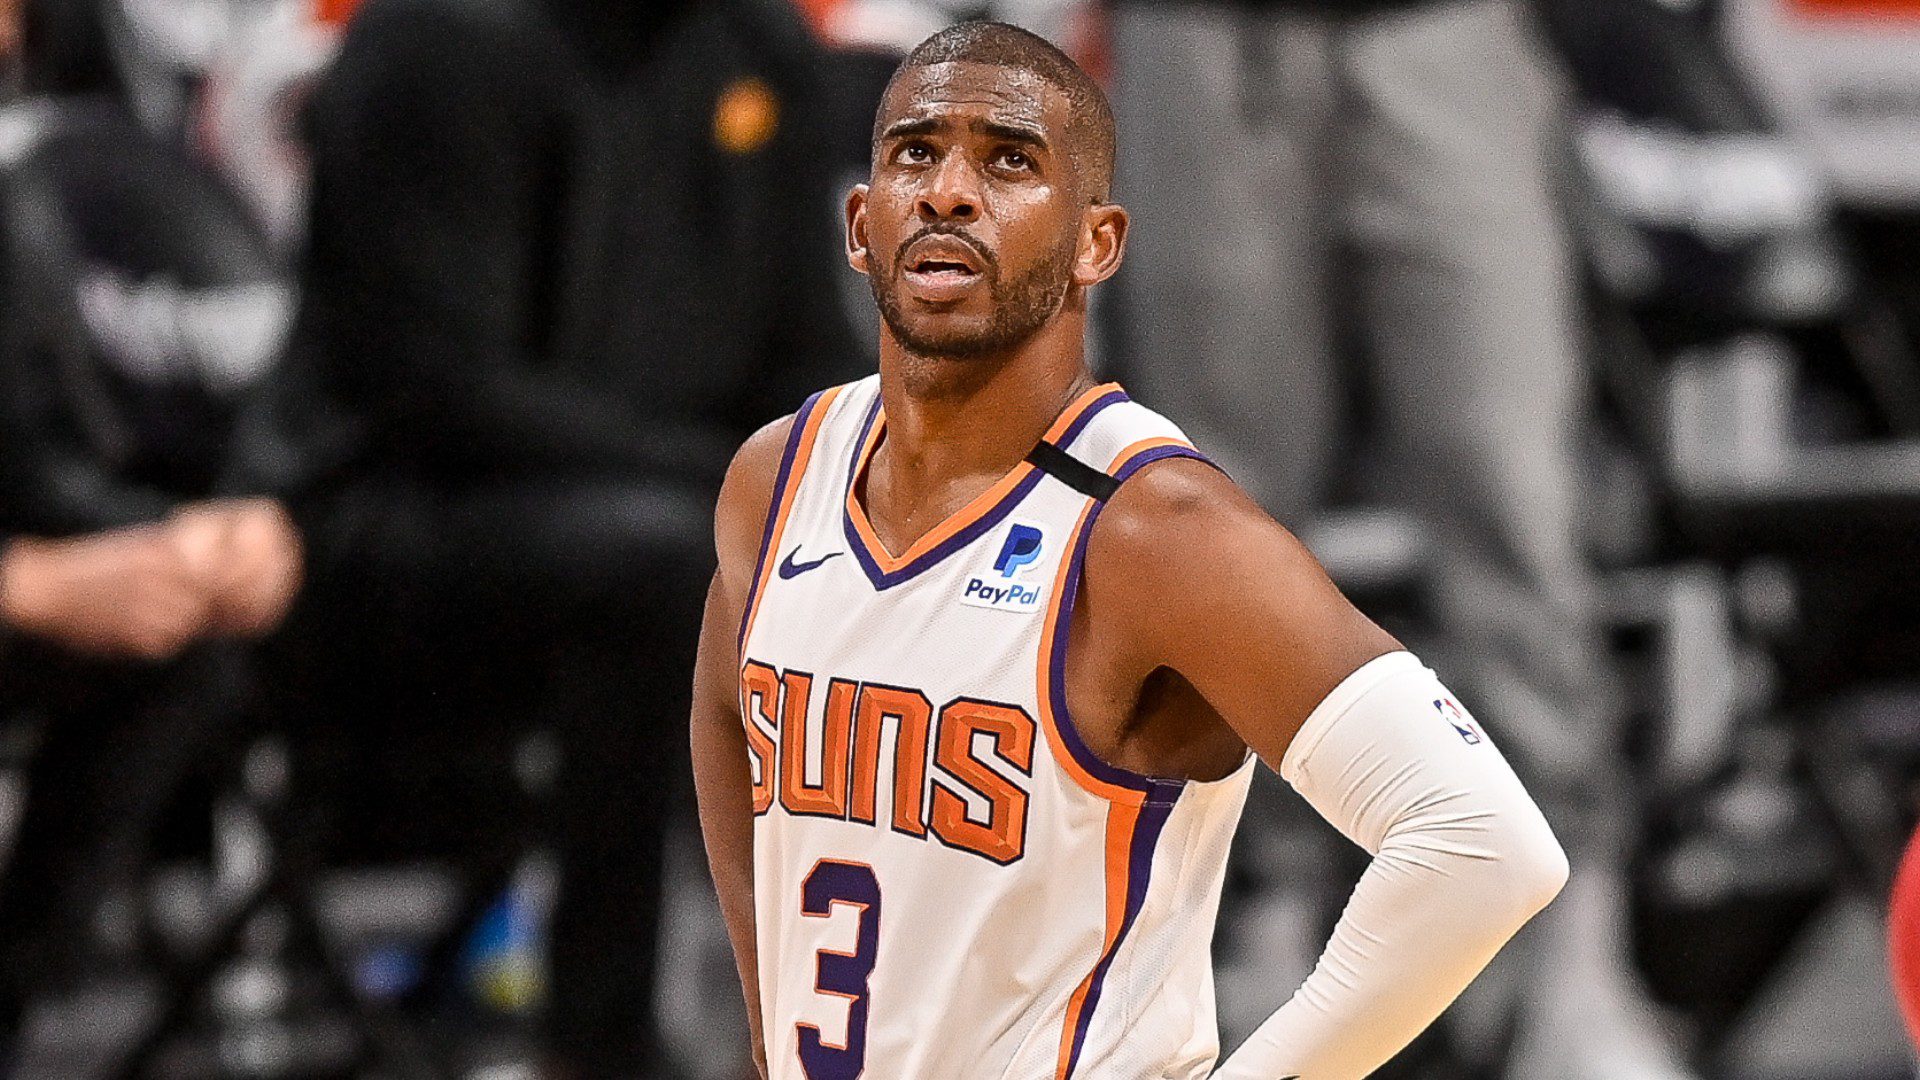 Chris Paul Passes Steve Nash for 3rd Best All-Time in Assists